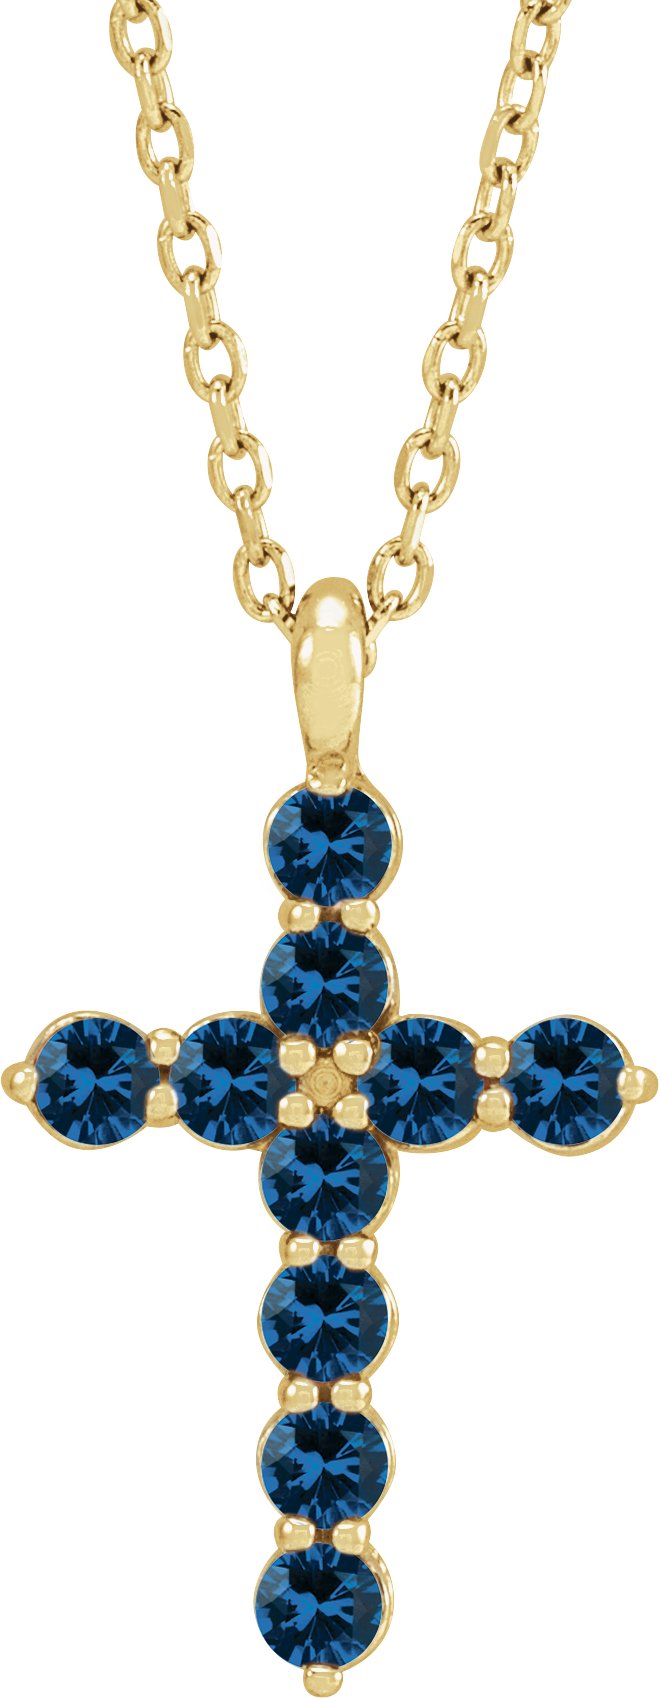 14K Yellow Natural Blue Sapphire Cross 16-18" Necklace